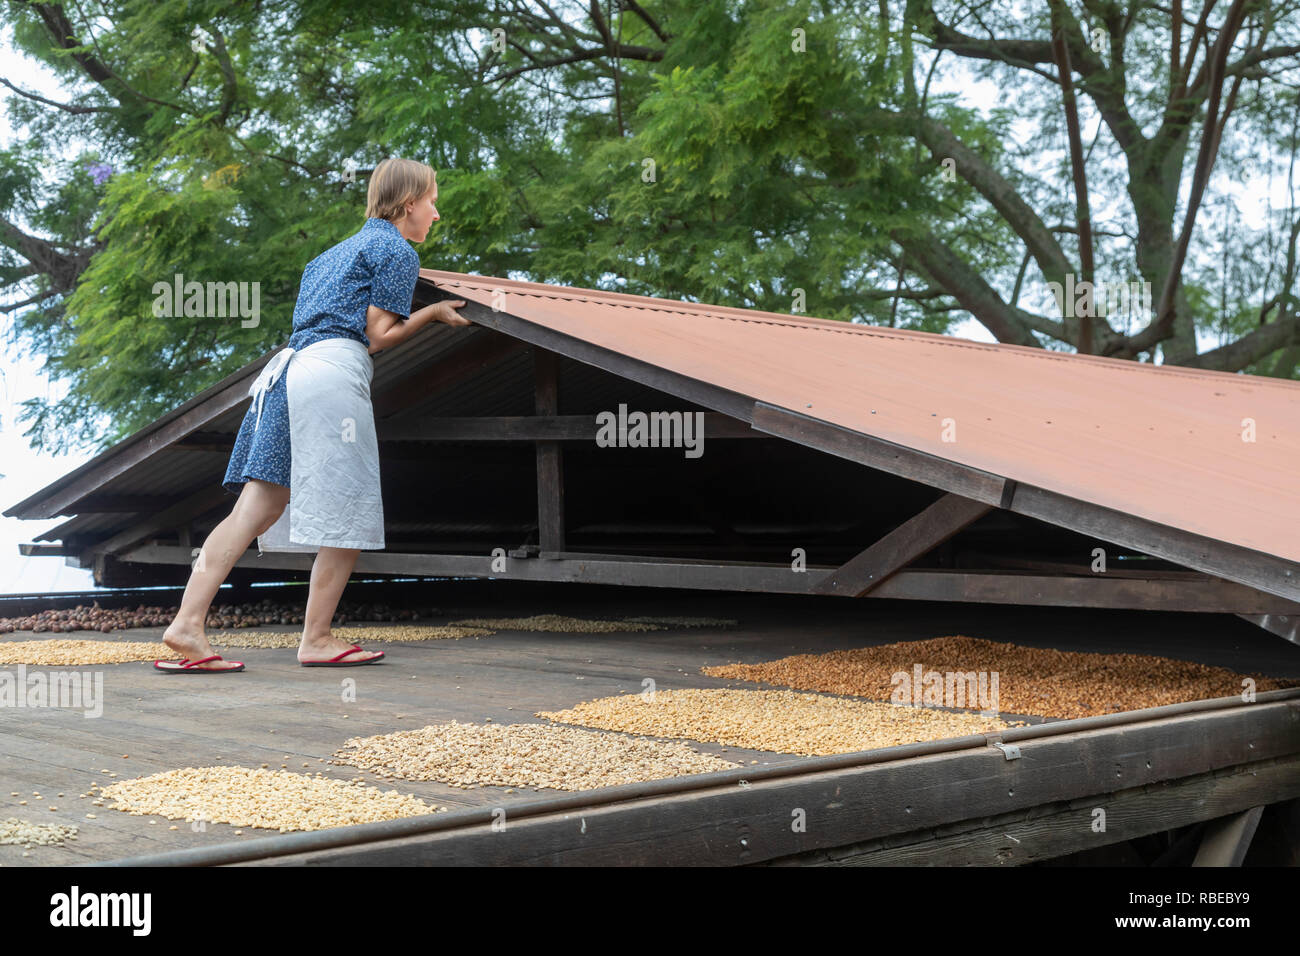 Captain Cook, Hawaii - The hoshidana, or drying platform, at the Kona Coffee Living History Farm. The movable roof allows one person to cover the dryi Stock Photo